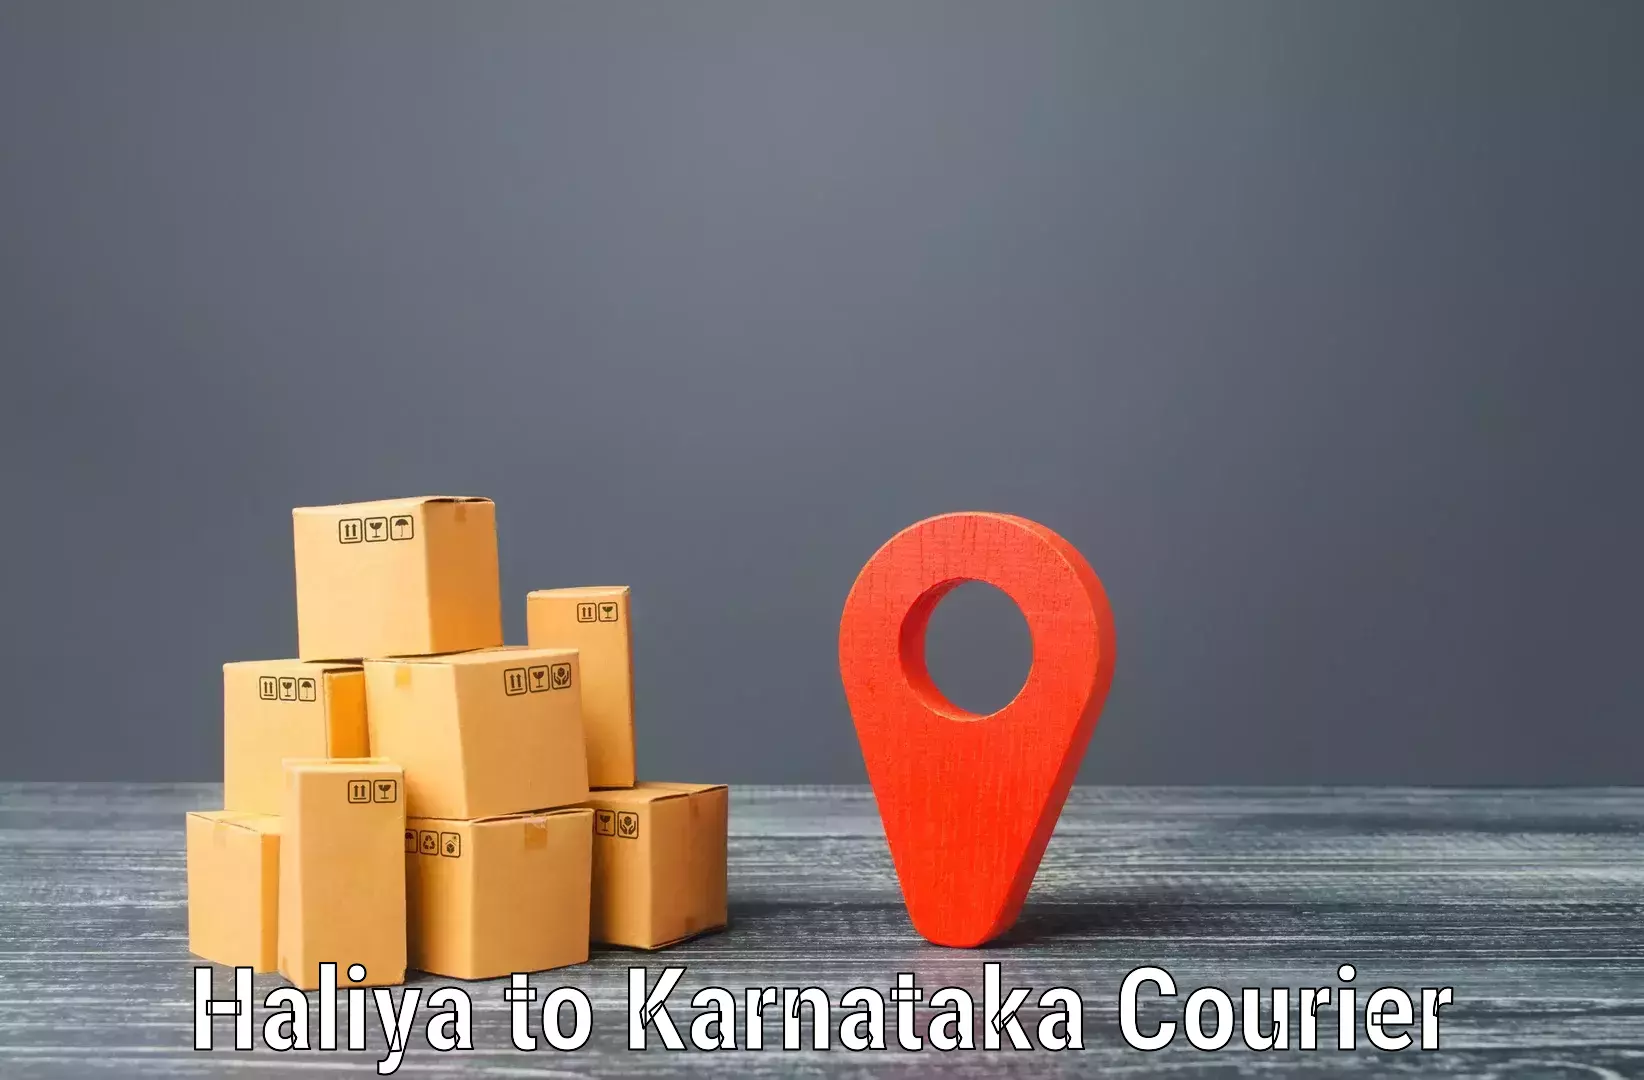 Reliable courier service Haliya to Kollegal